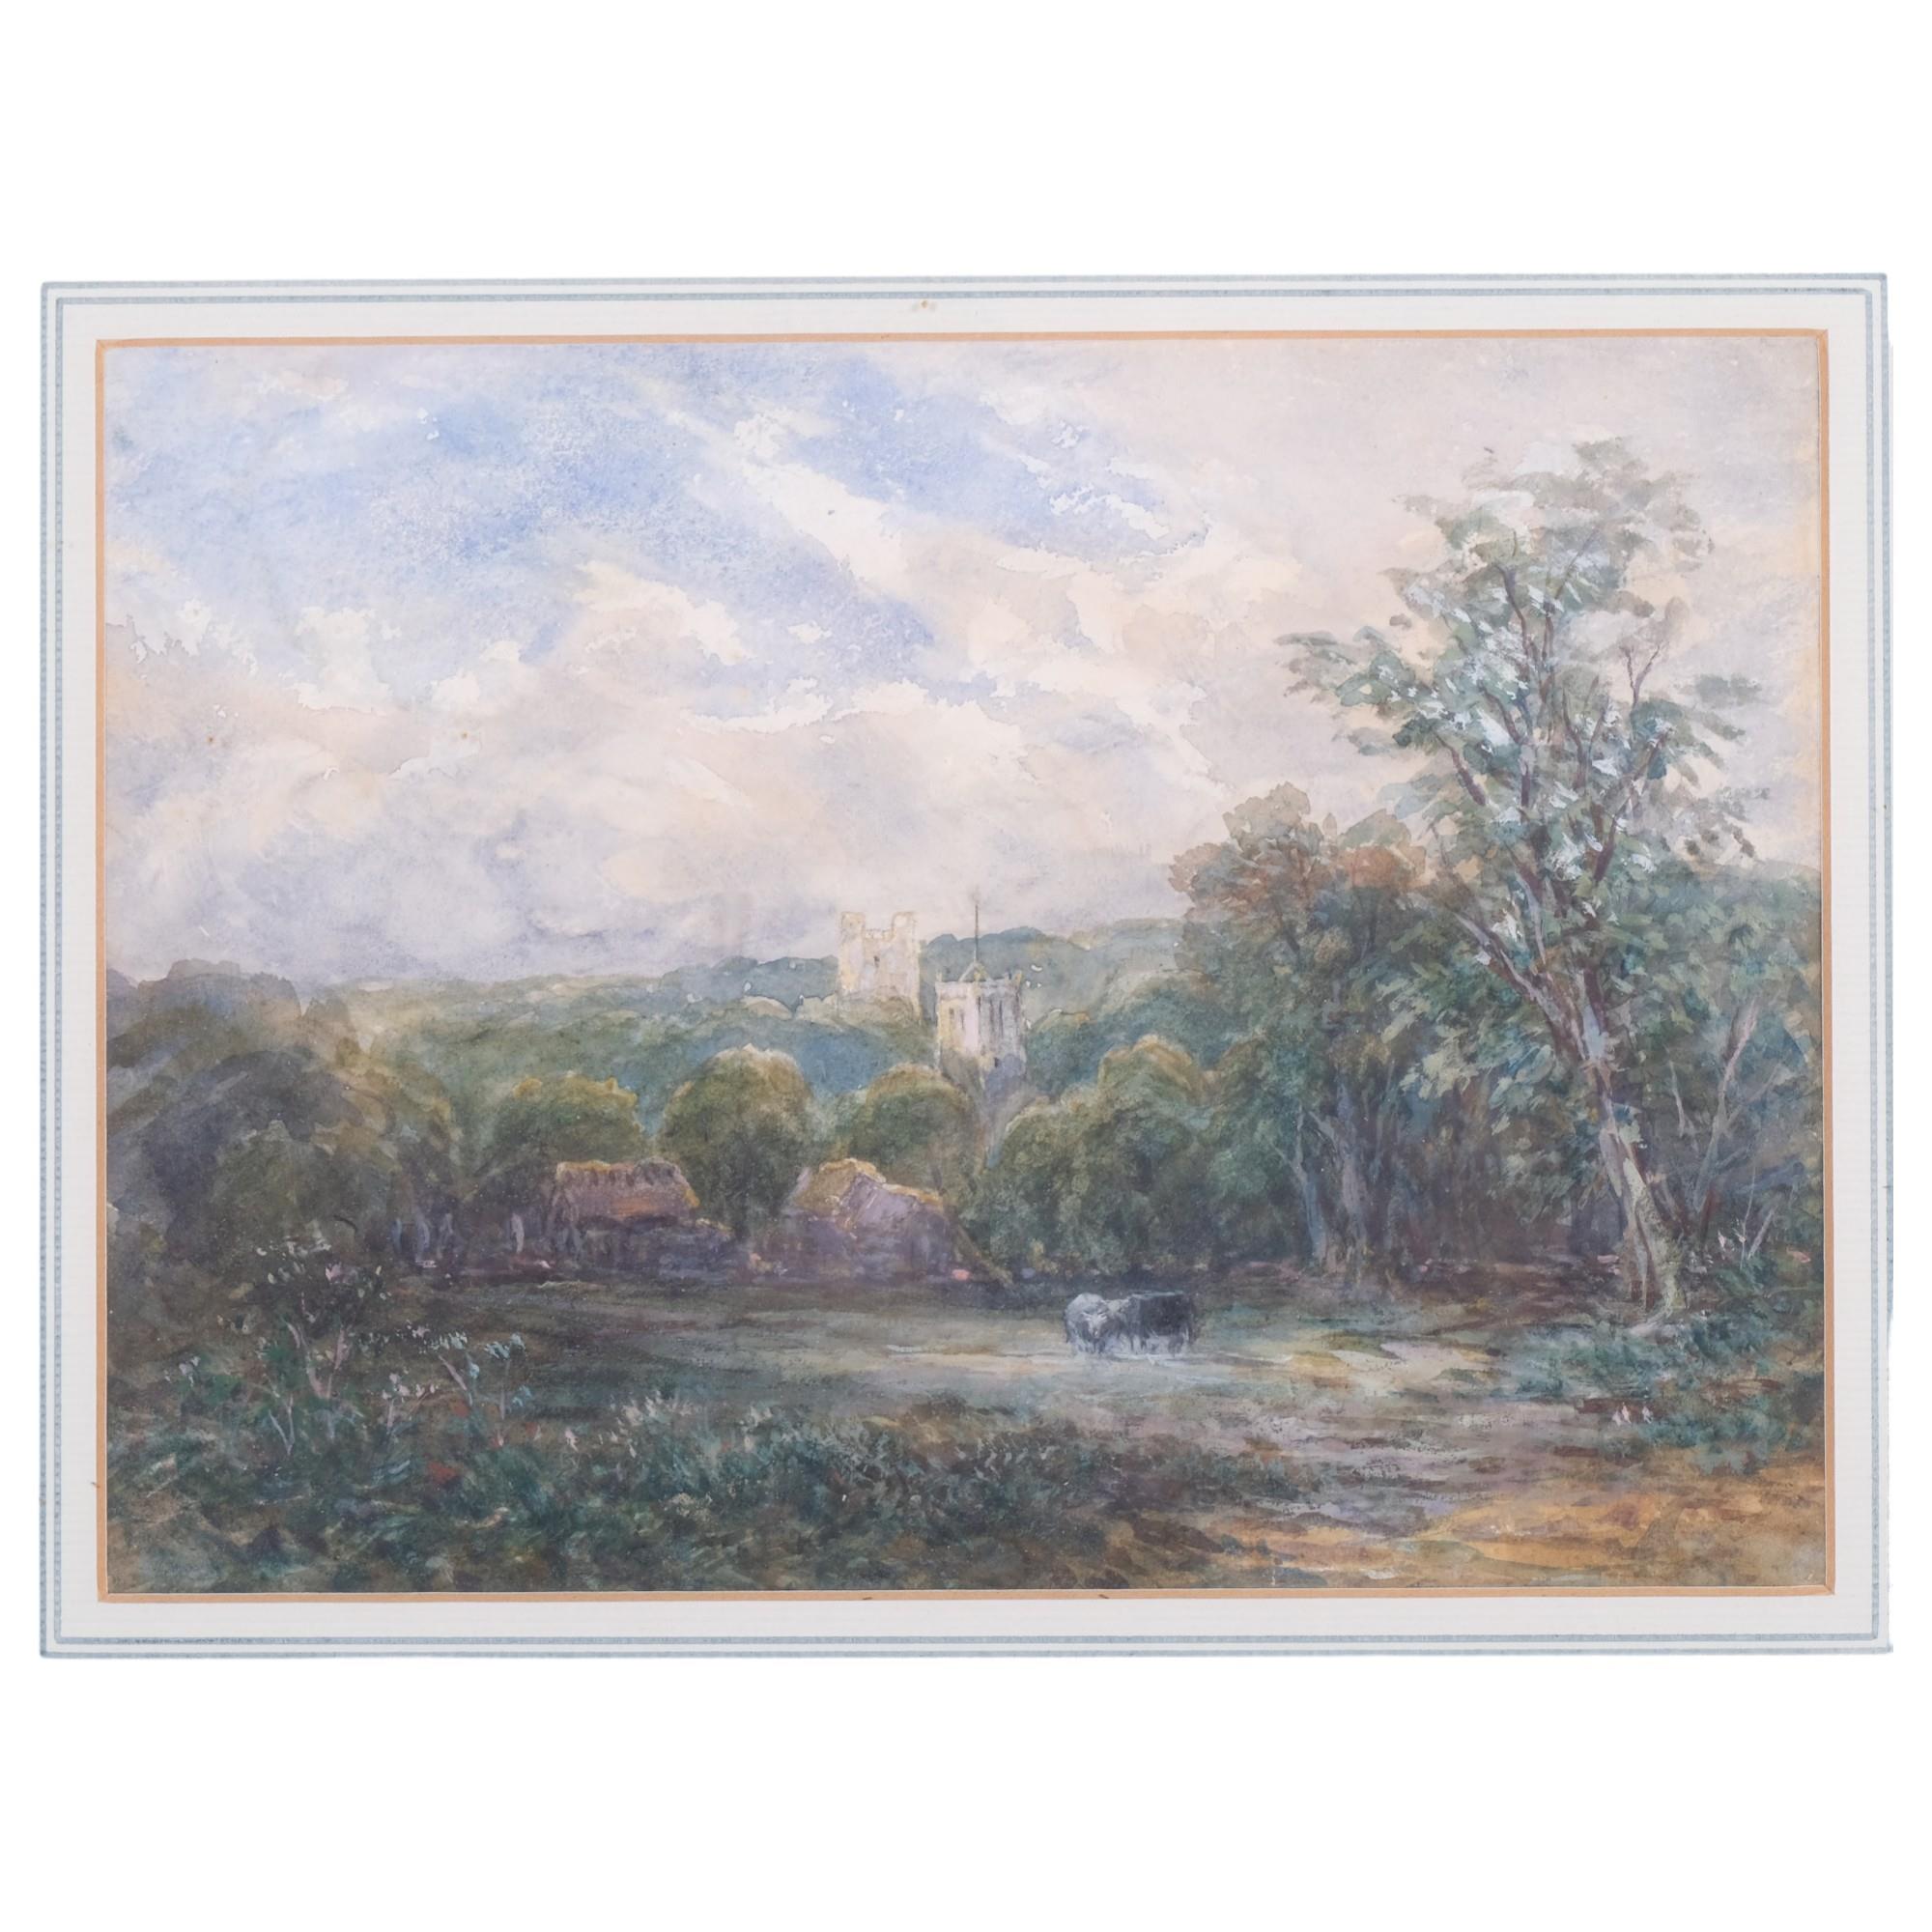 Watercolour, country landscape with church and cows, framed, 33cm x 39cm overall